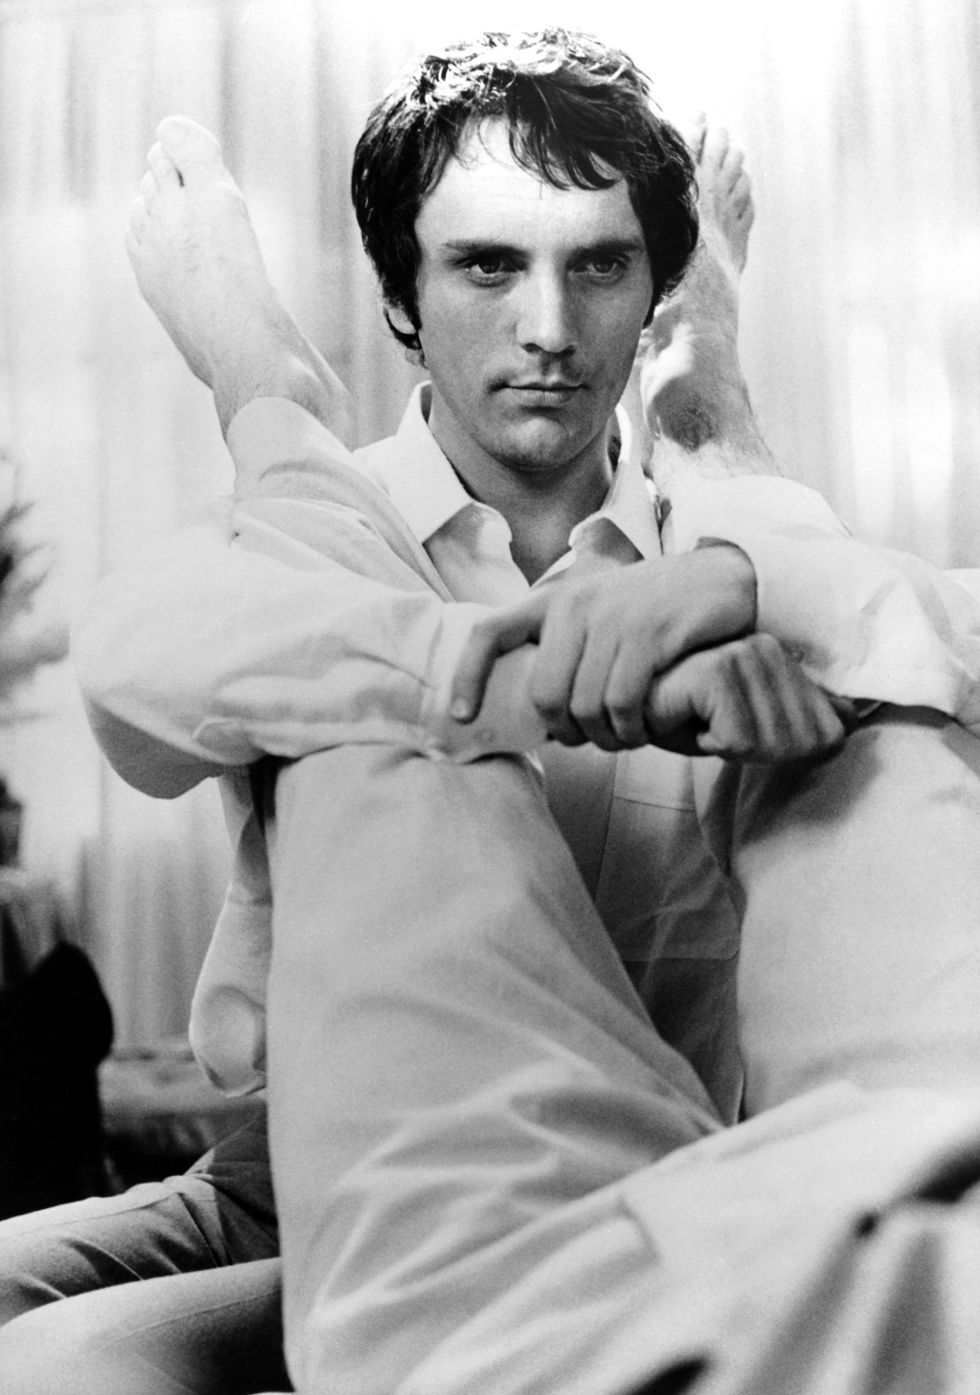 british actor terence stamp on the set of the film “theoreme” teorema directed by pier paolo pasolini photo by aetos produzioni cinematografichebrc produzione srlsunset boulevardcorbis via getty images